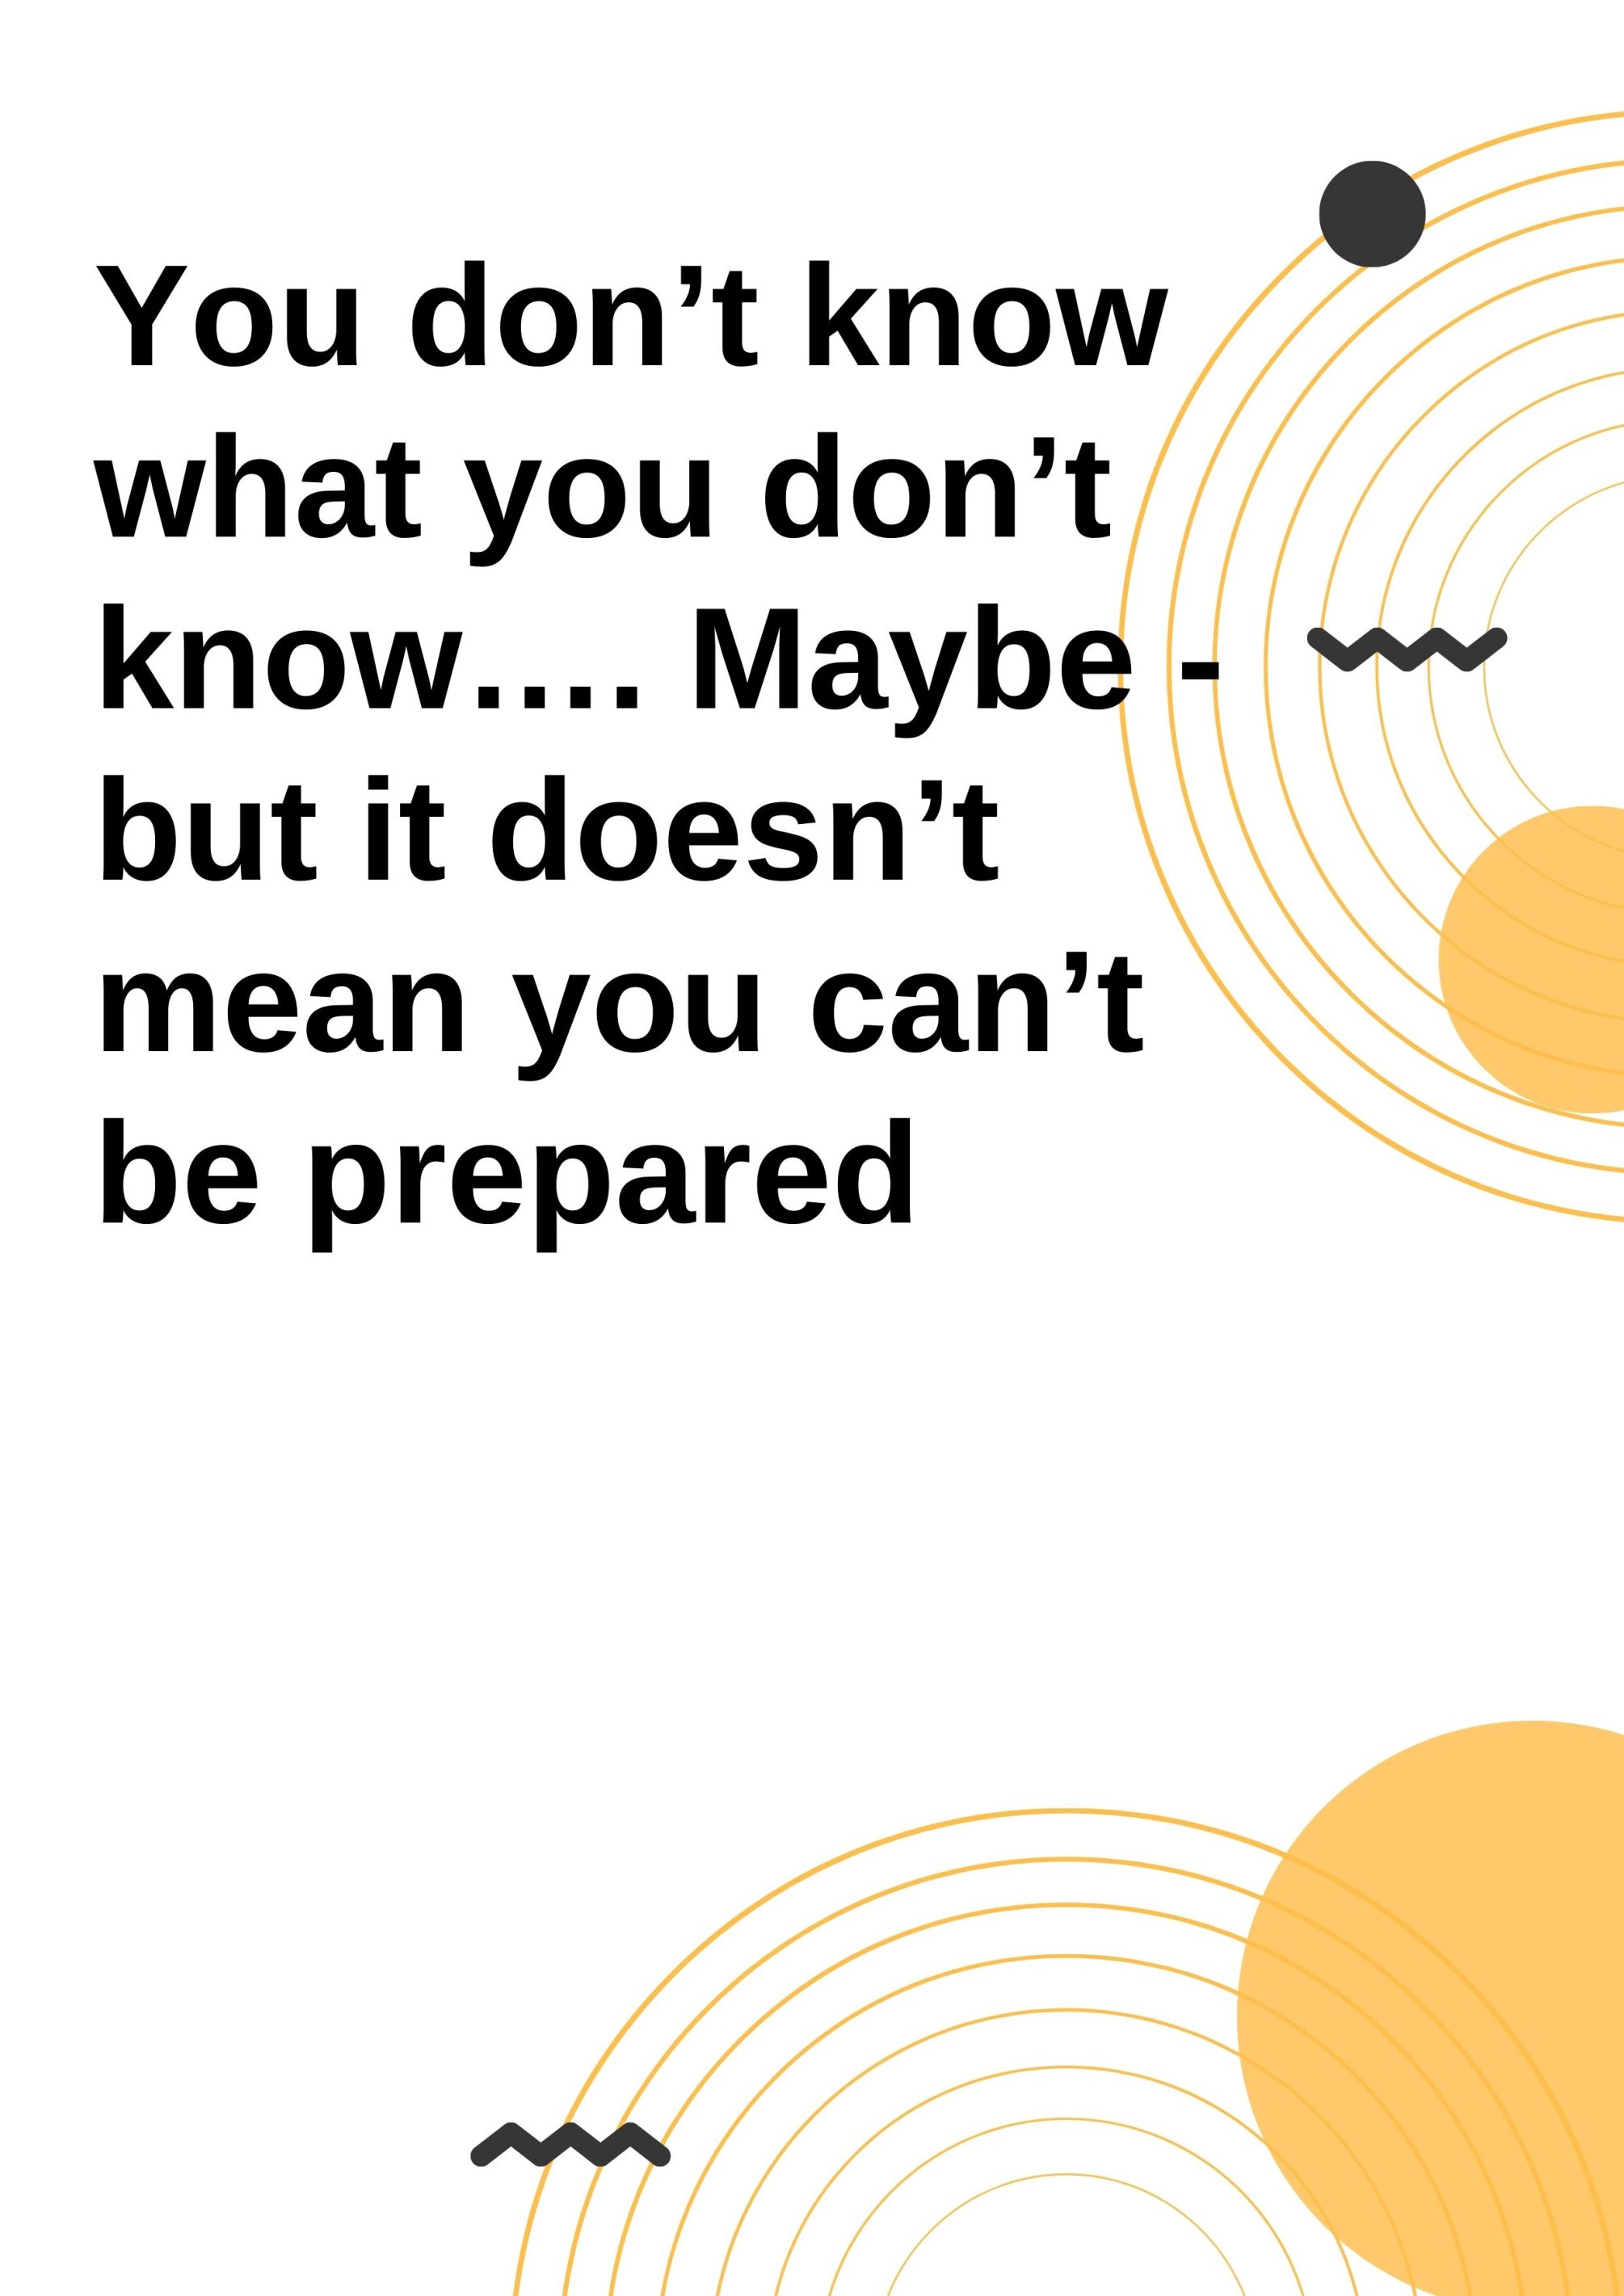 You don’t know what you don’t know…. Maybe - but it doesn’t mean you can’t be prepared